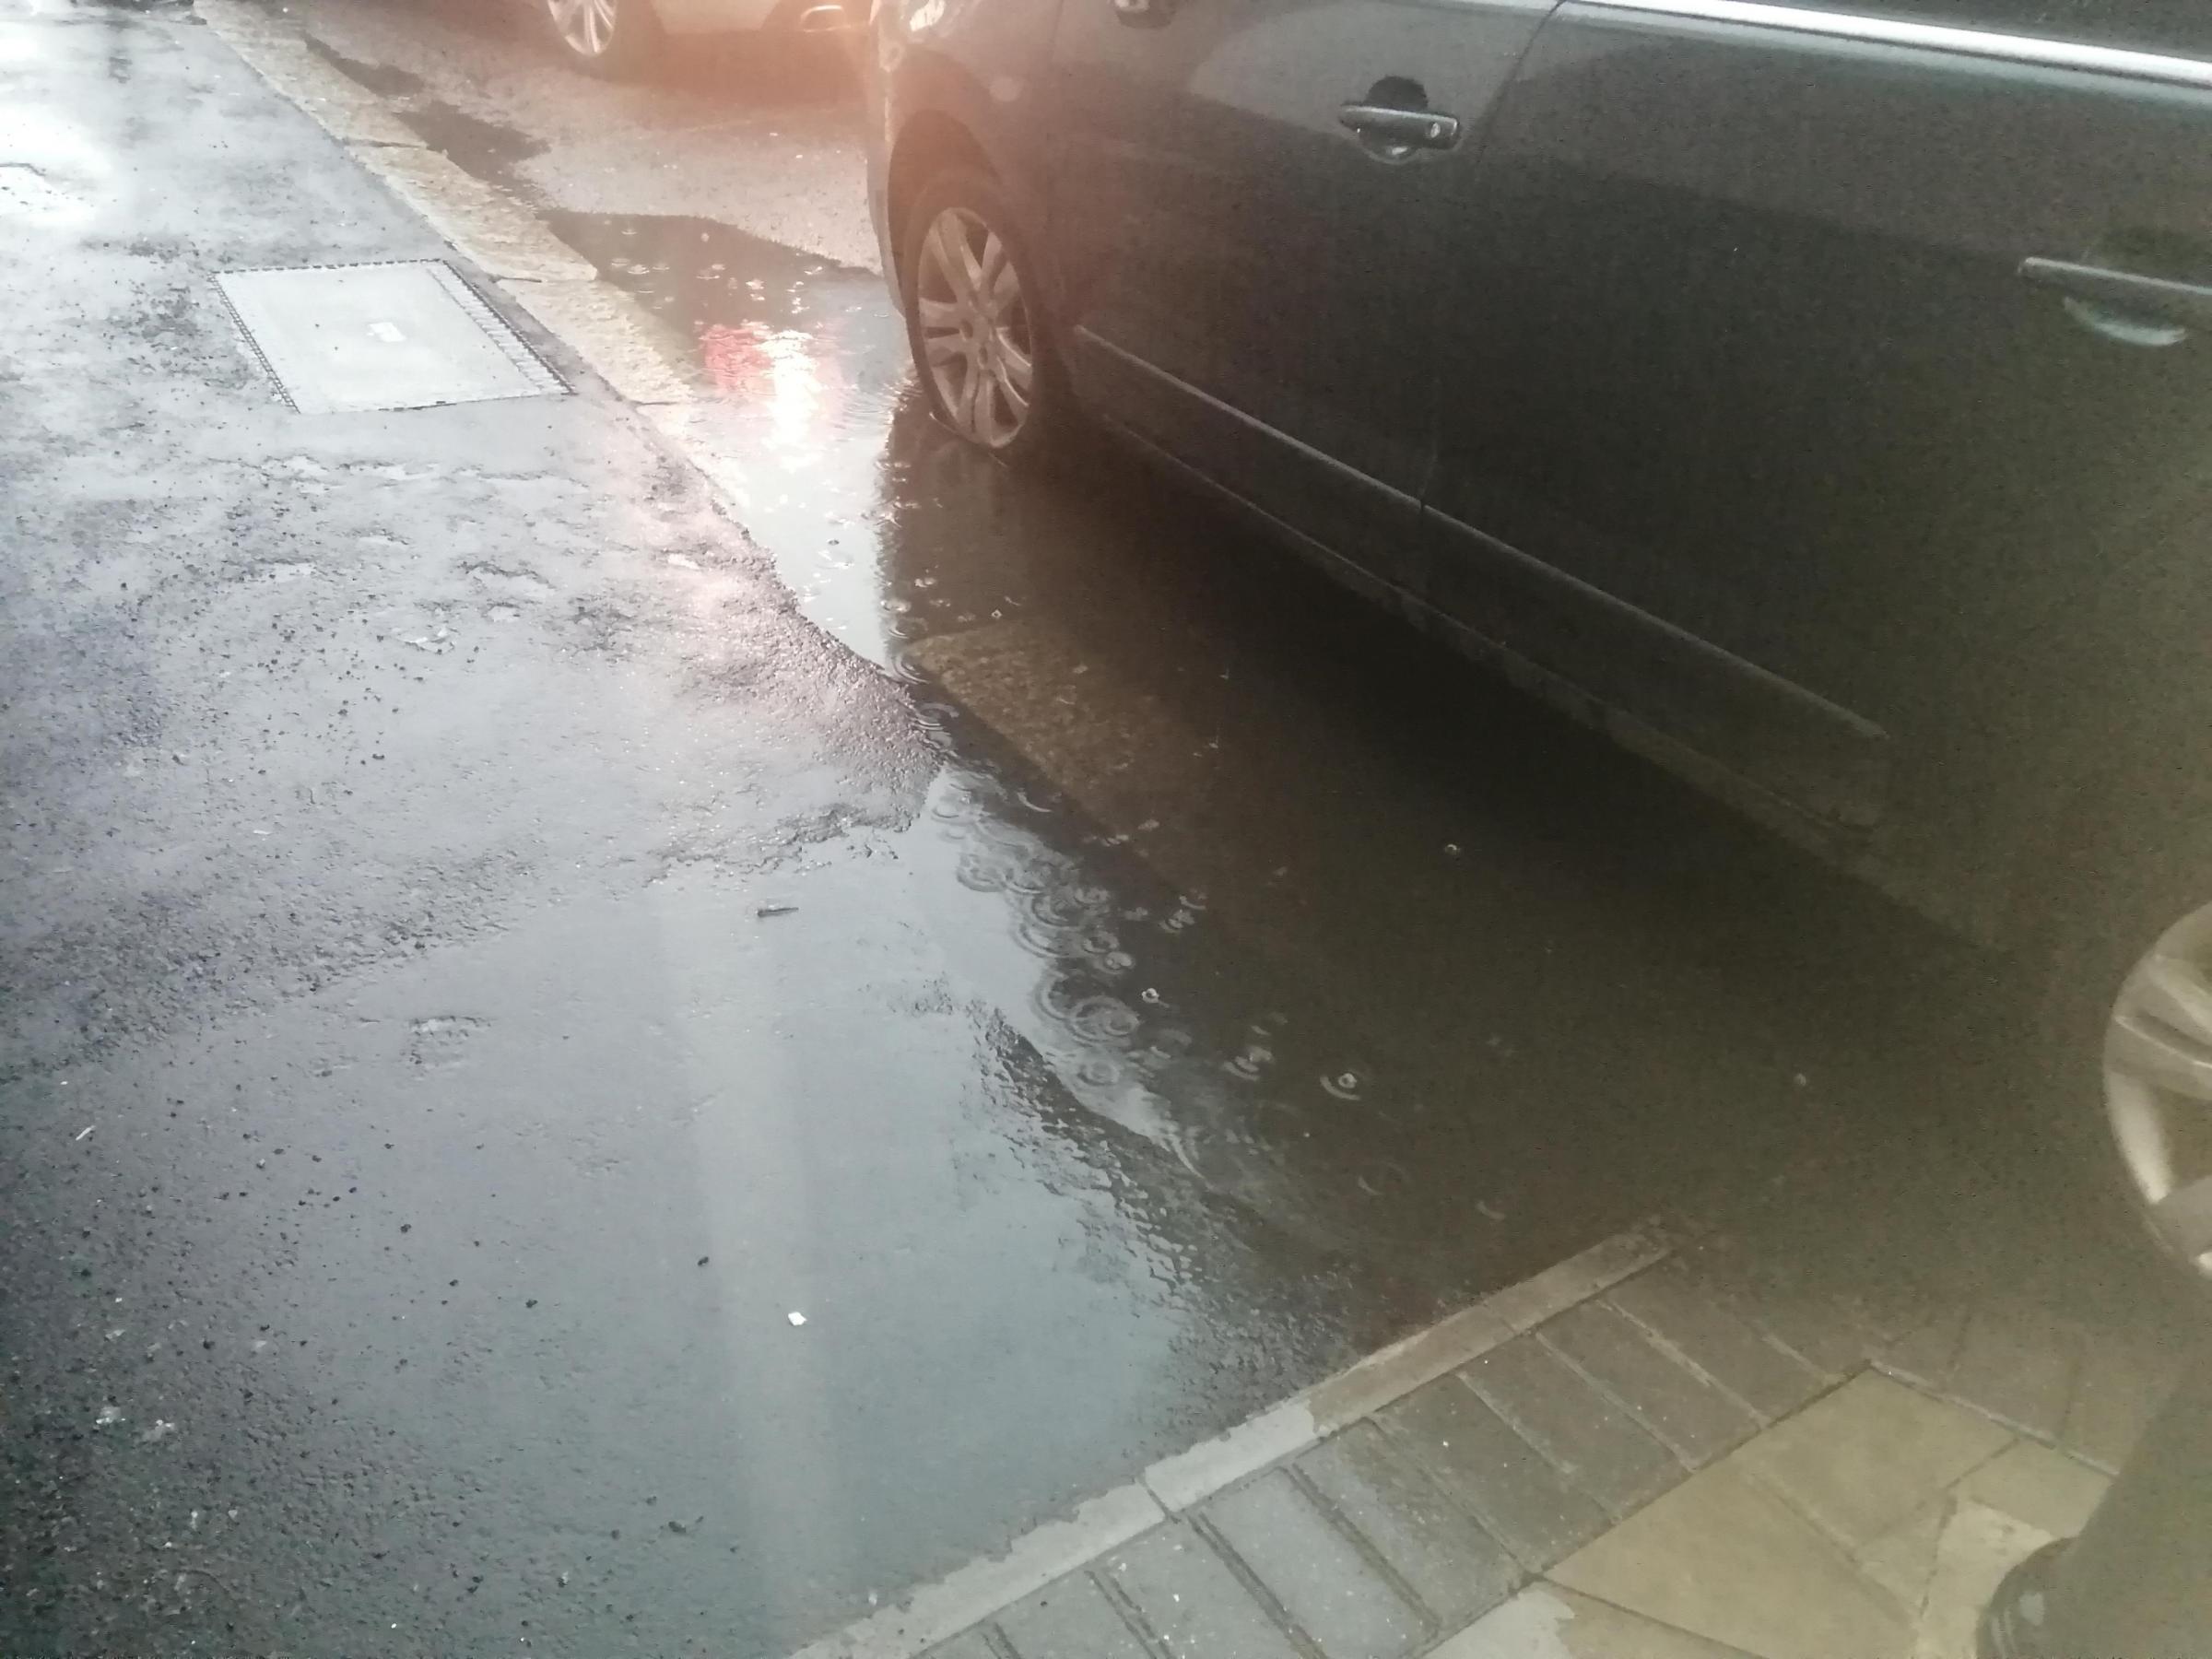 Cllr Khan took this image of water forming on the road within the last week. He says it has only got worse due to recent levels of rainfall